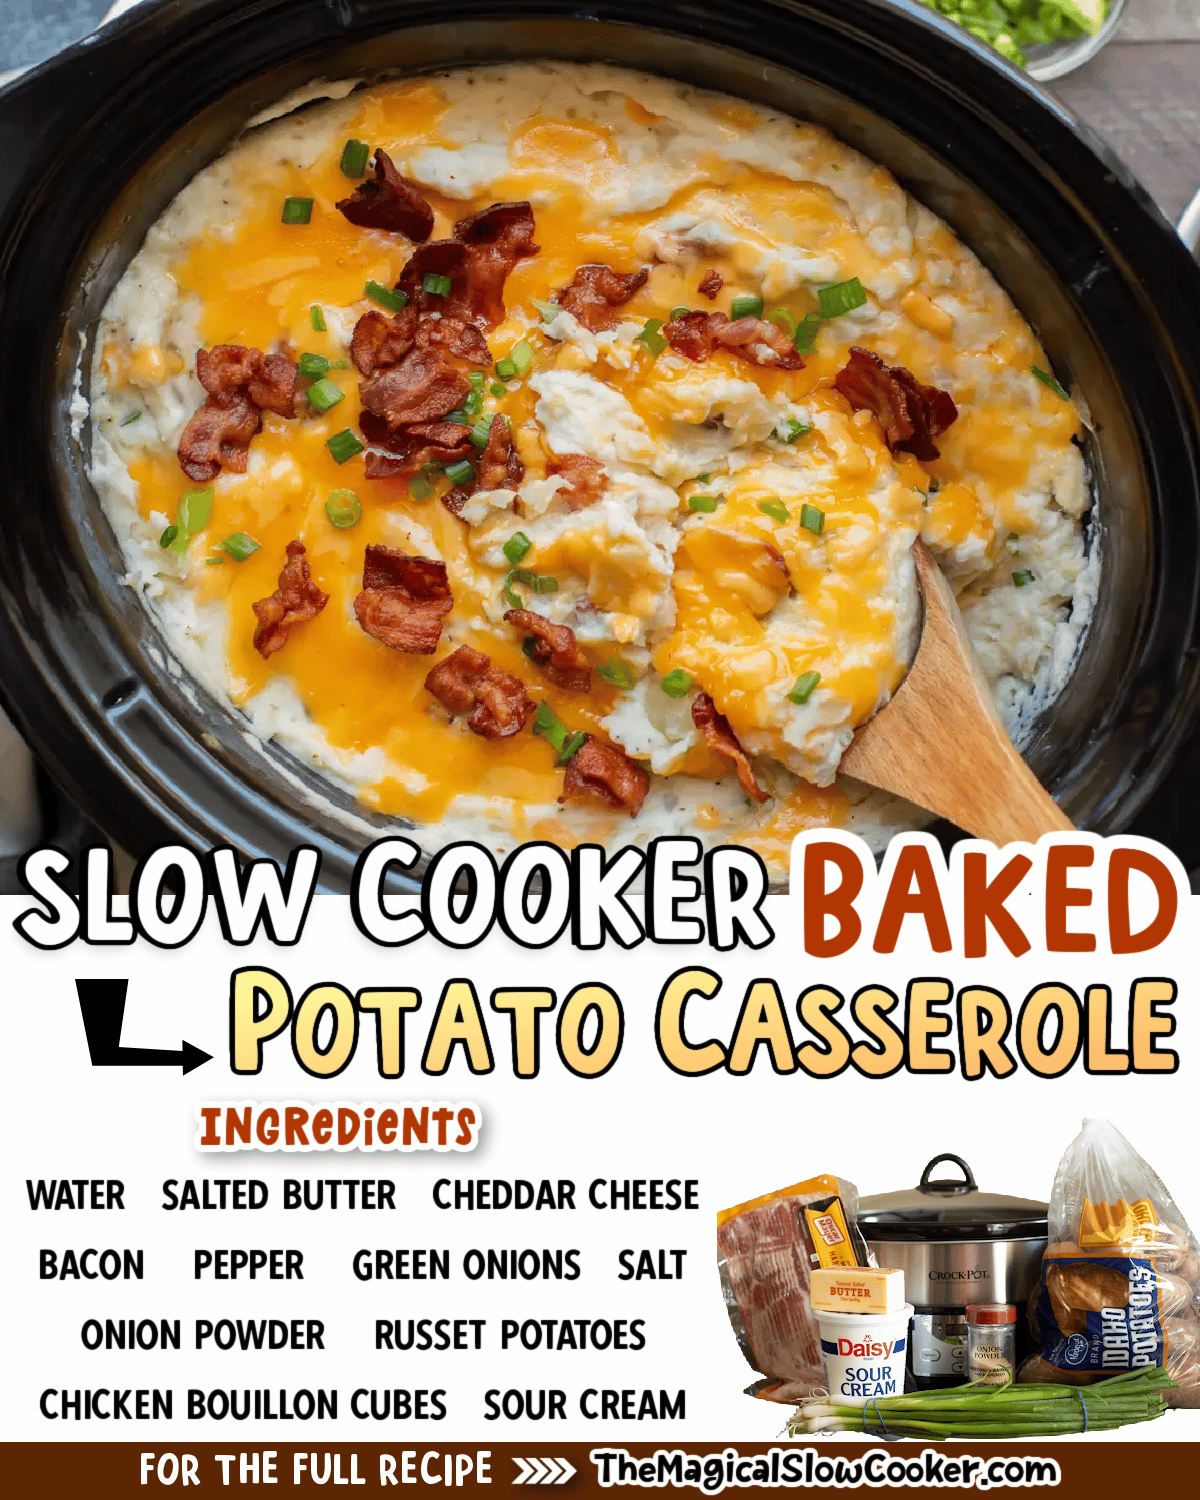 Collage of baked potato casserole with text of what the ingredients are.